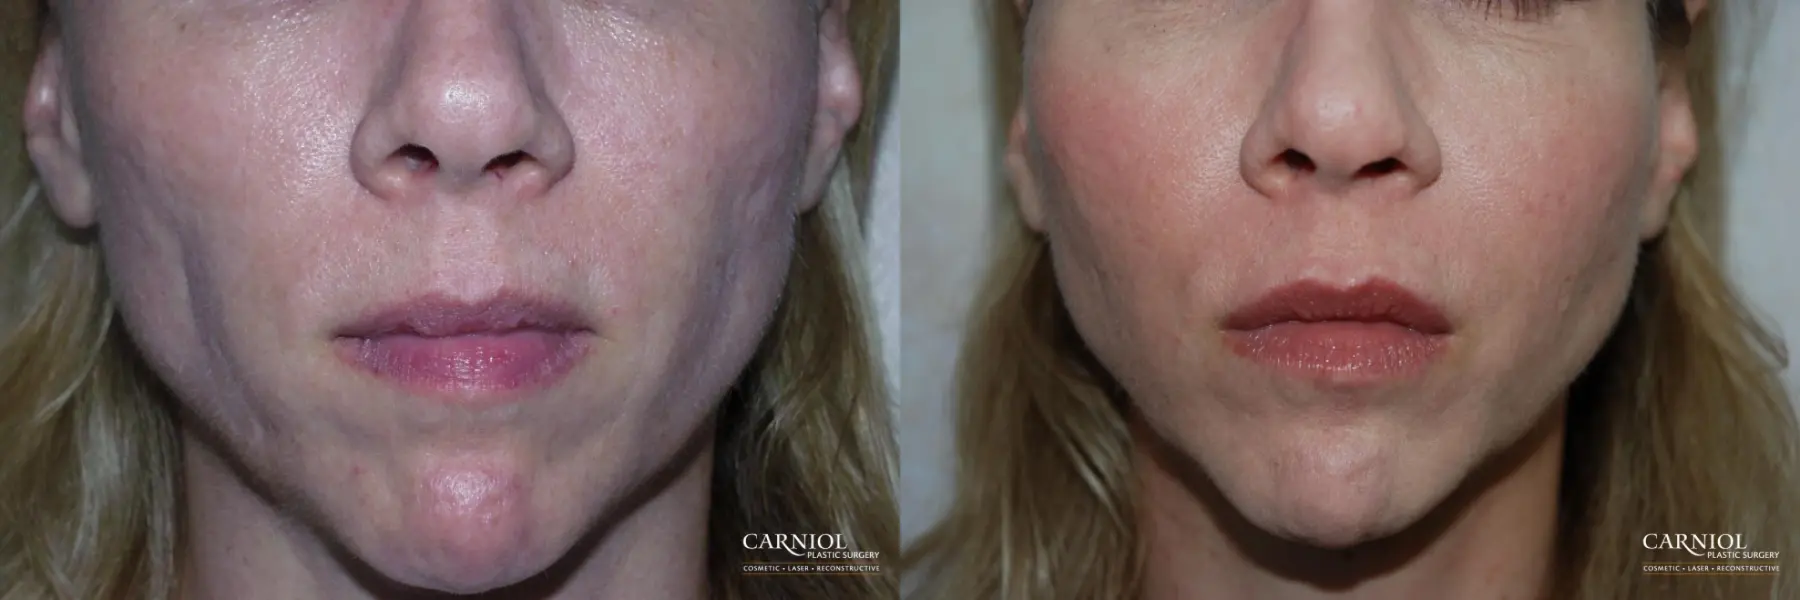 Non-Surgical Mini-Facelift: Patient 8 - Before and After  